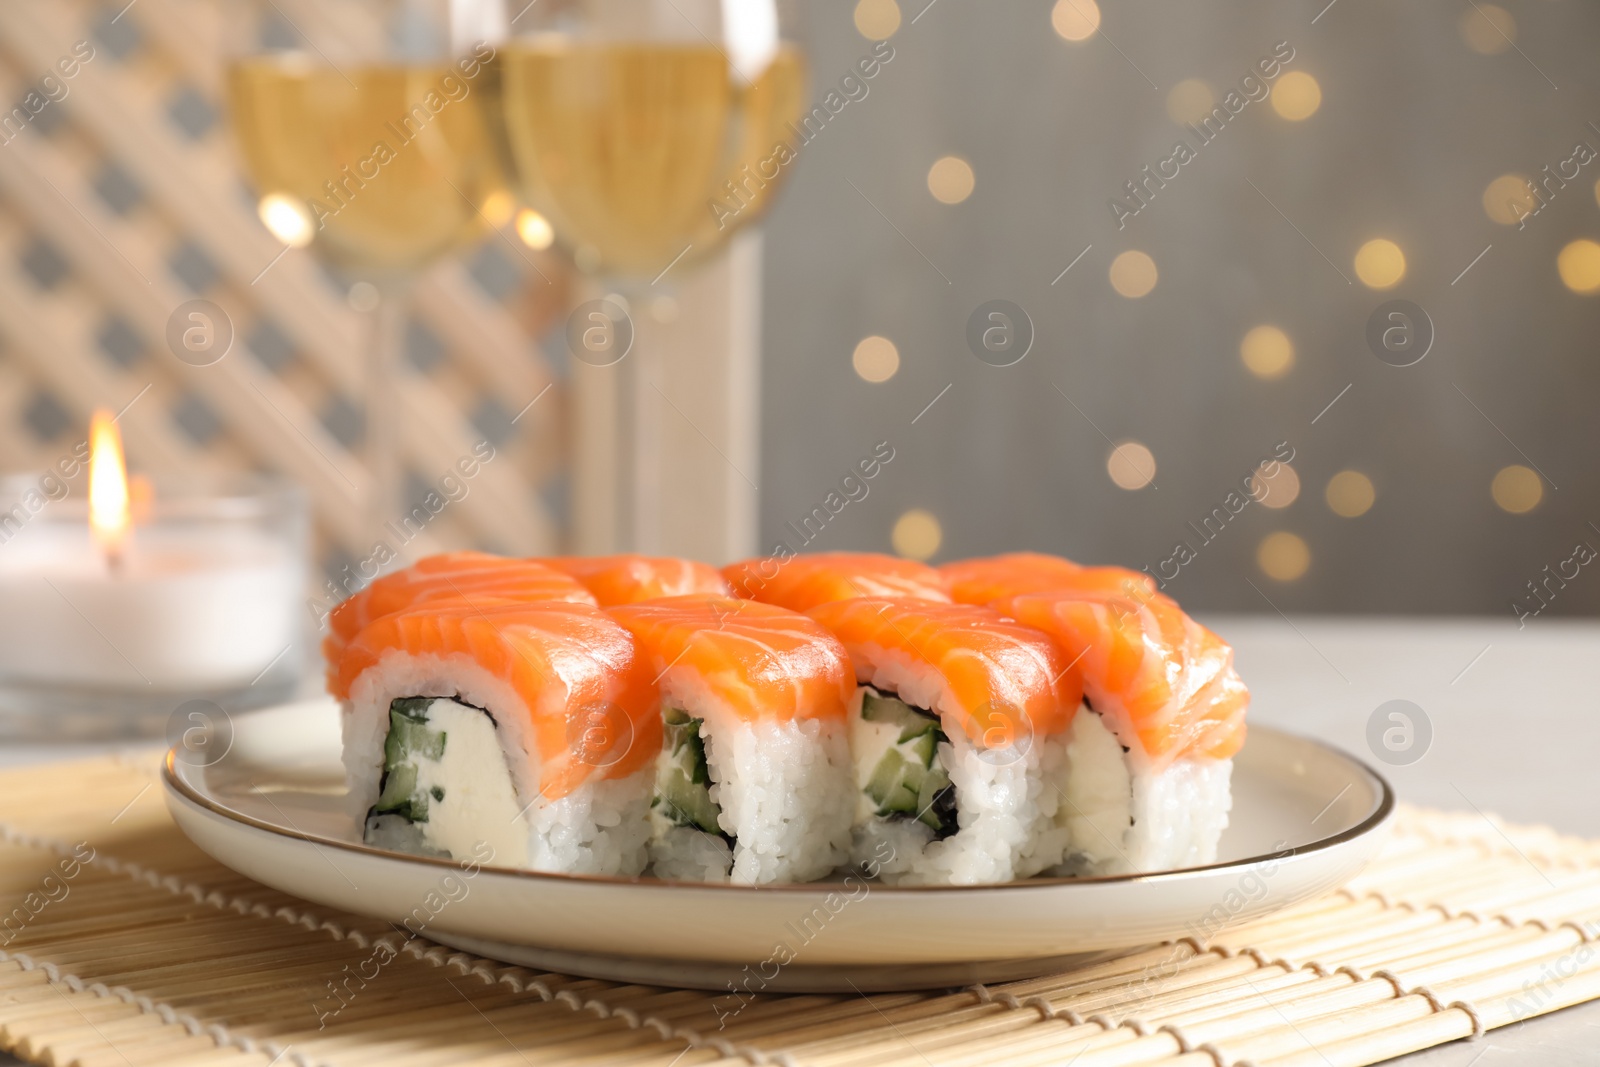 Photo of Tasty sushi rolls and glasses of wine on table against blurred lights, closeup